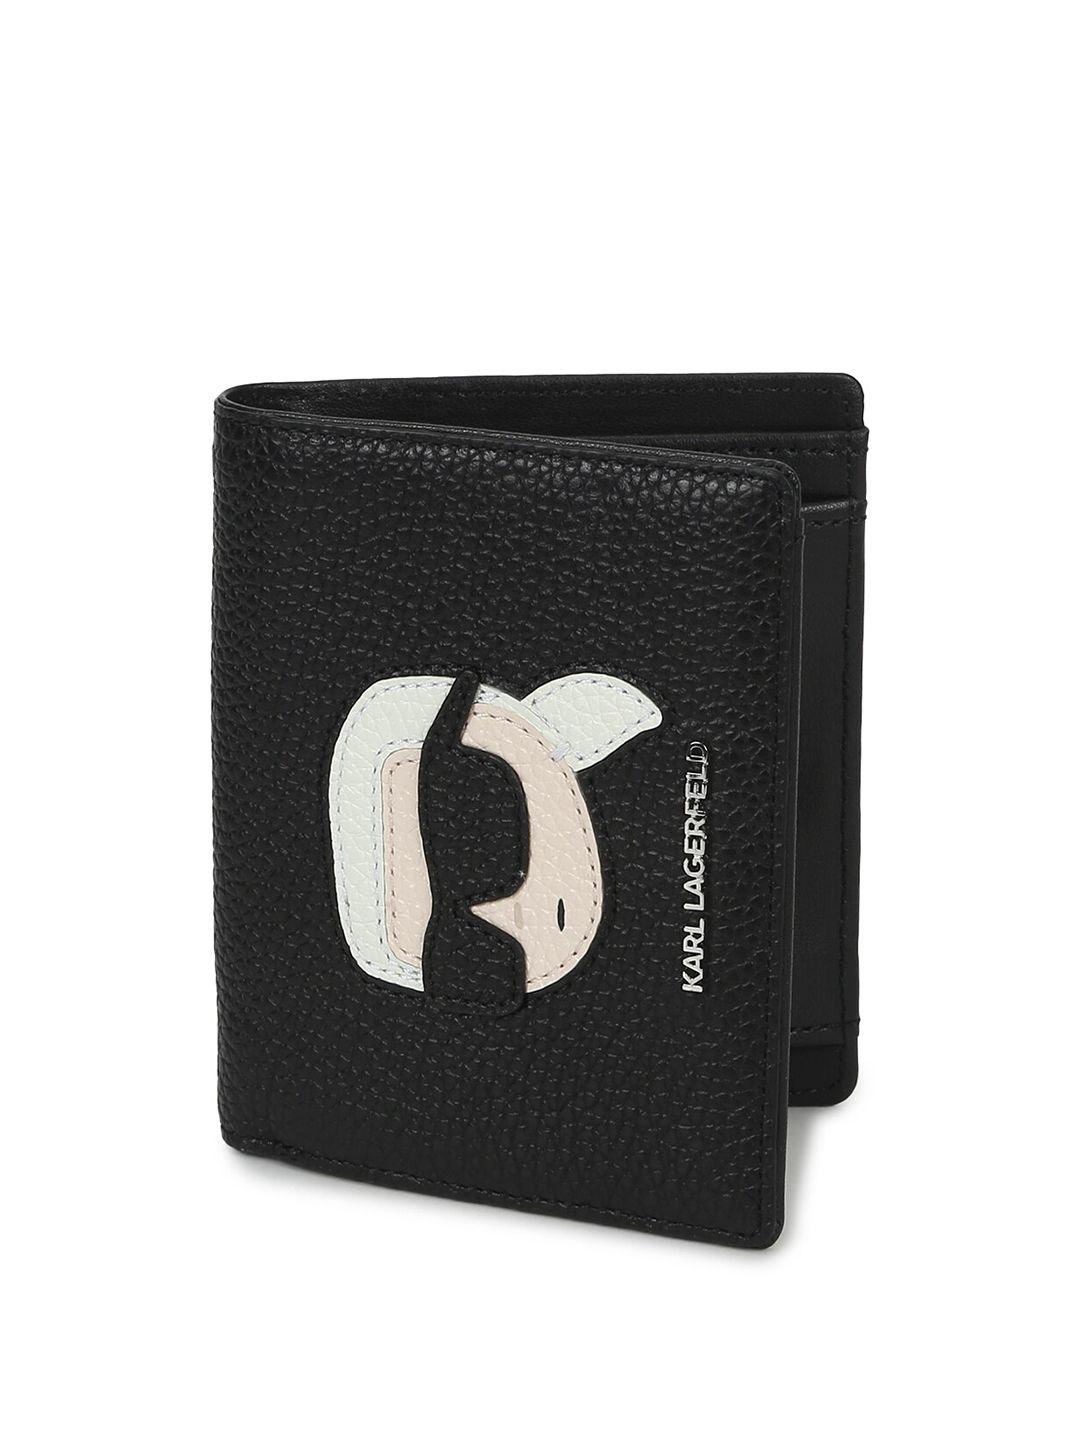 karl lagerfeld textured leather fashion two fold wallet